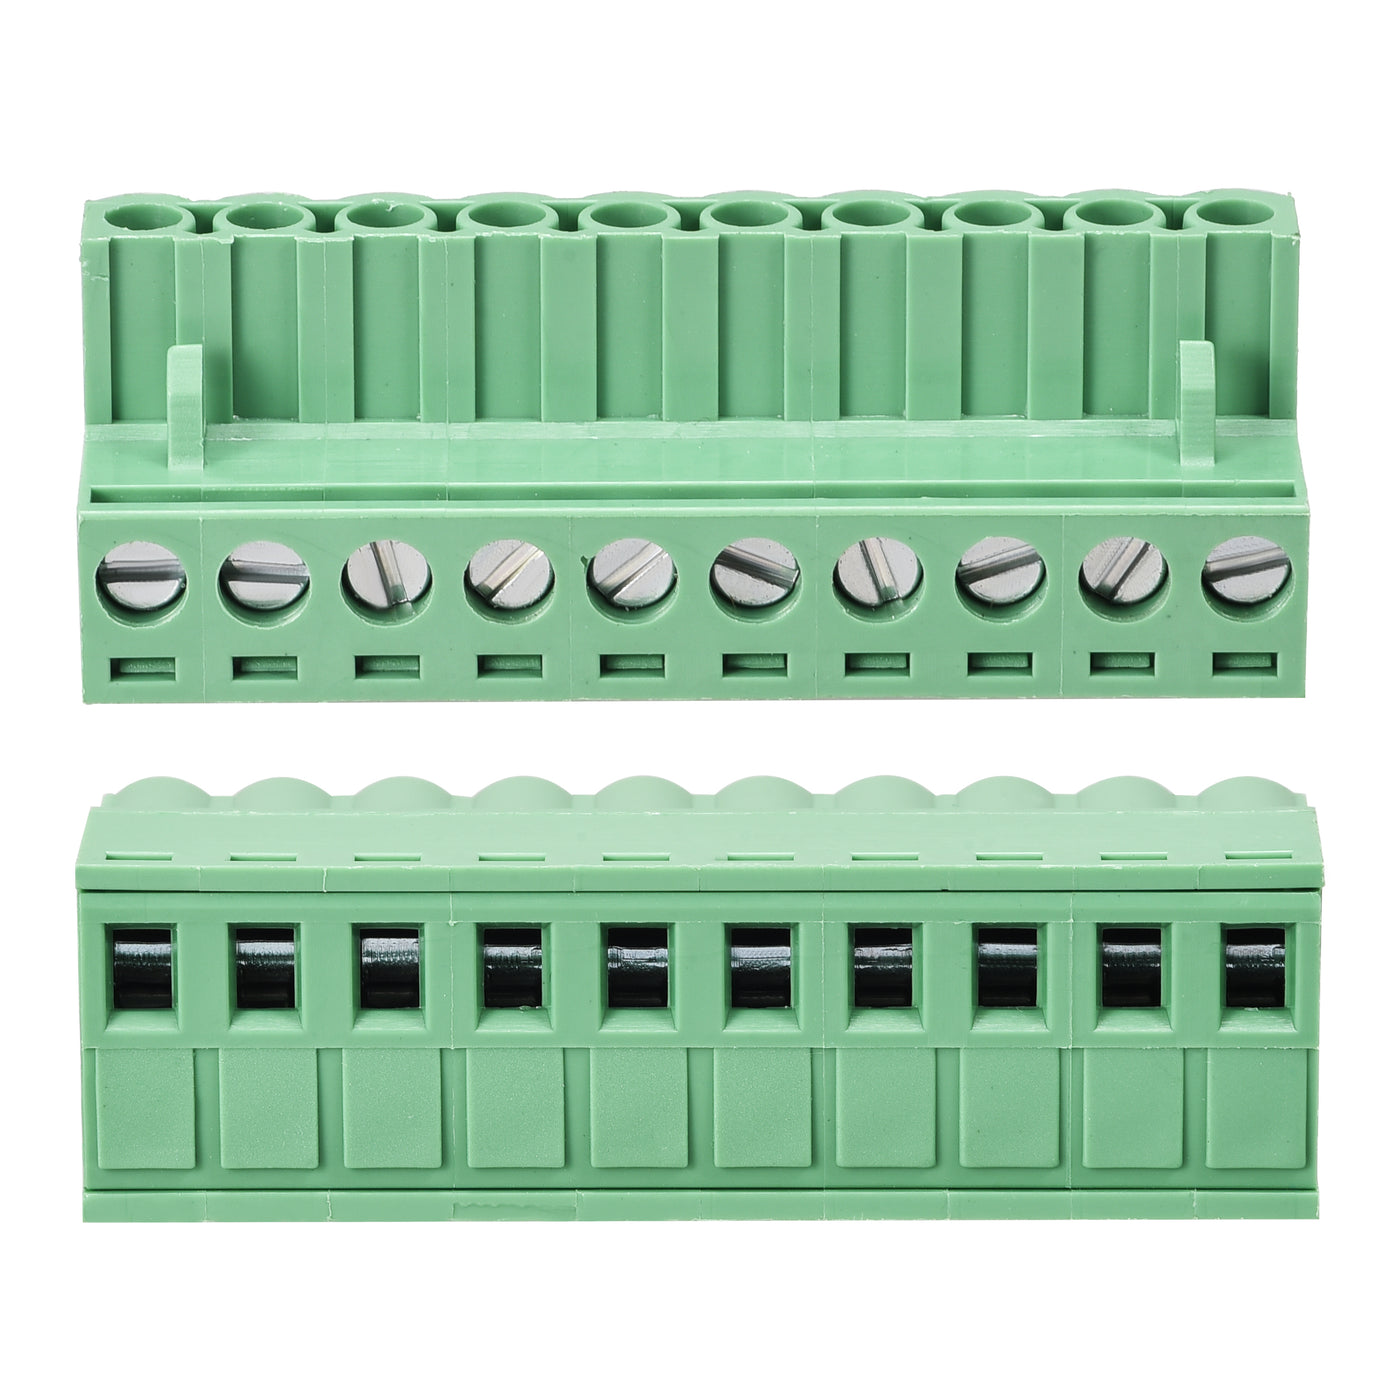 uxcell Uxcell 10-Pin 5.08mm Pitch Right Angle PCB Screw Terminal Block Connector 10 Sets